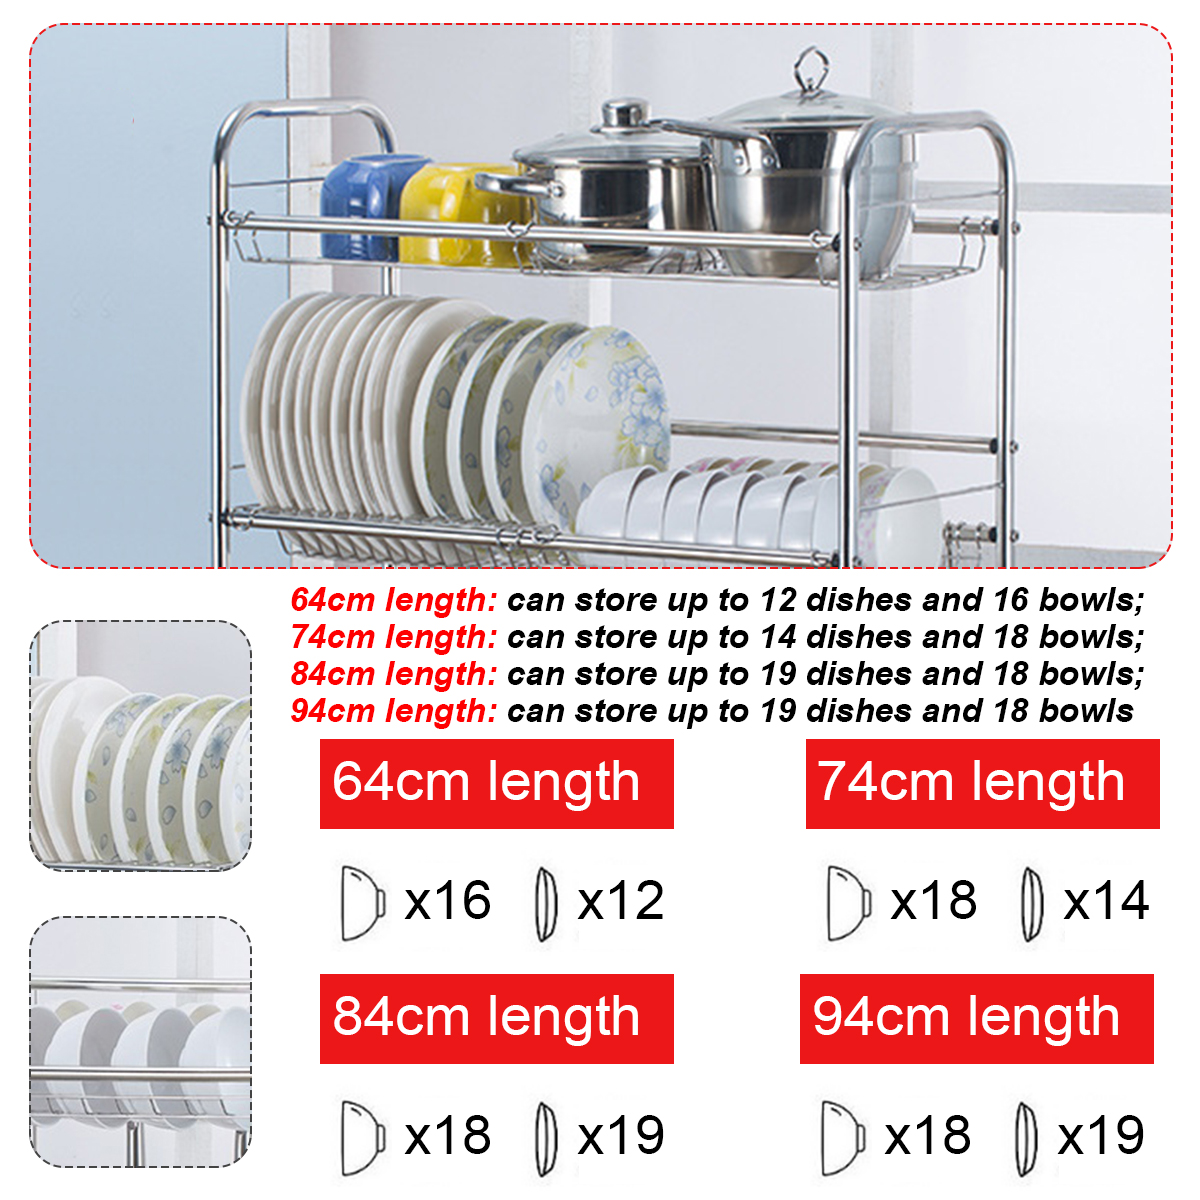 2-Tiers-Stainless-Steel-Dishes-Rack-Dual-Sink-Drain-Rack-Adjustable-Multi-use-Kitchen-Organizer-Rack-1661464-2